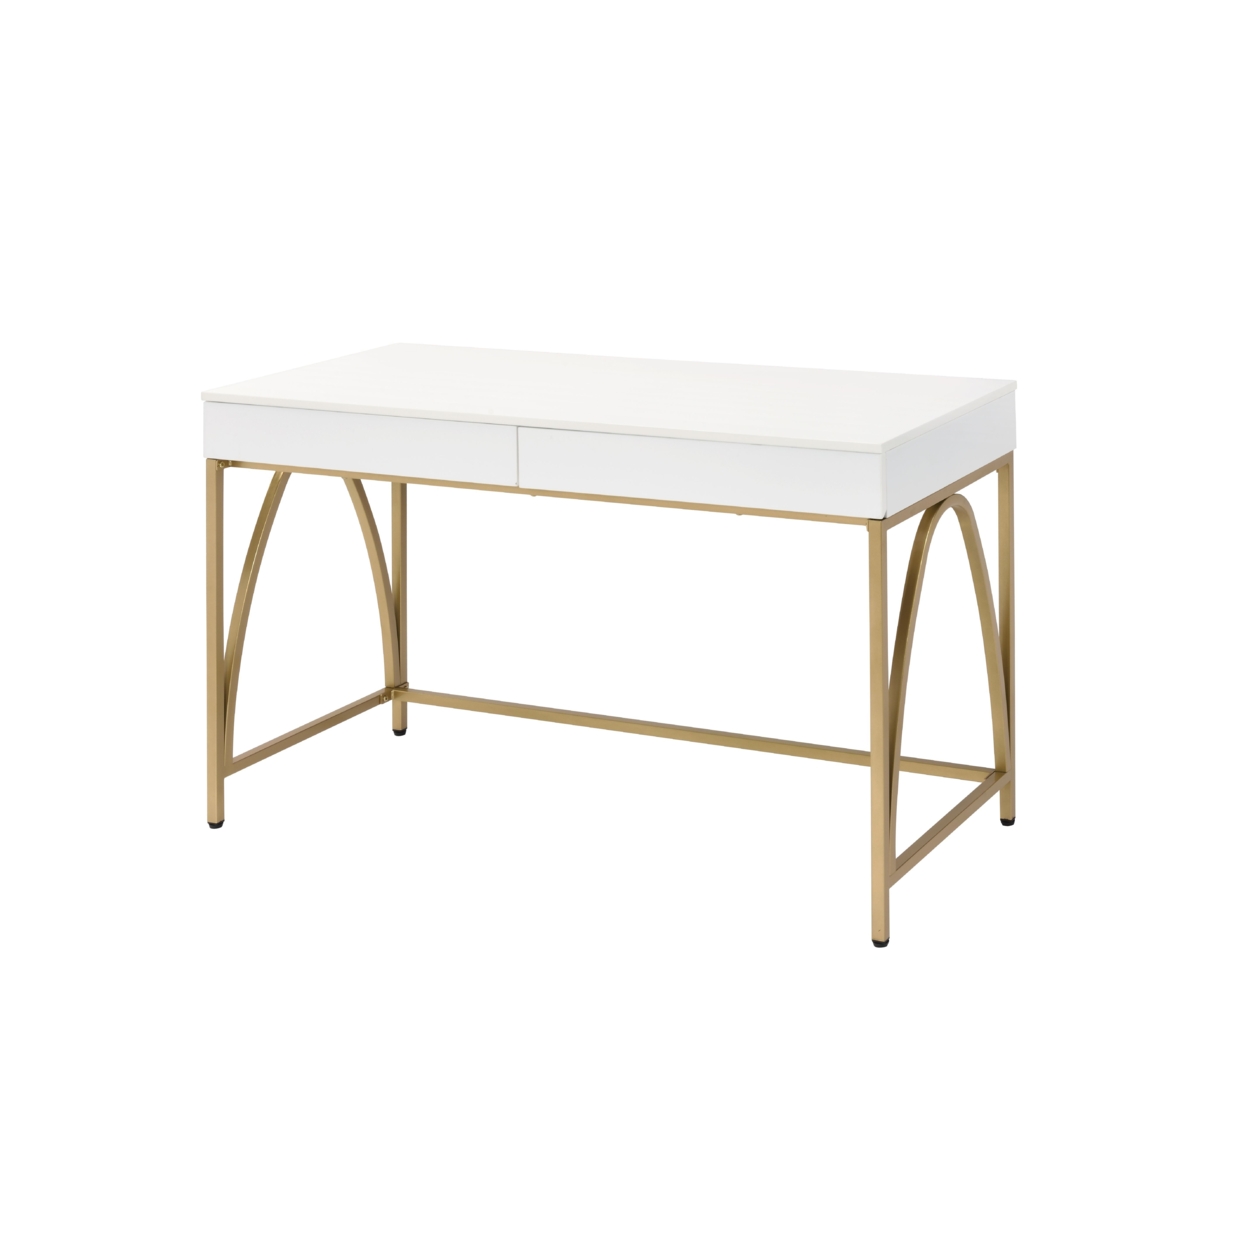 Rectangular Wooden Frame Desk With 2 Drawers And Metal Legs, White And Gold